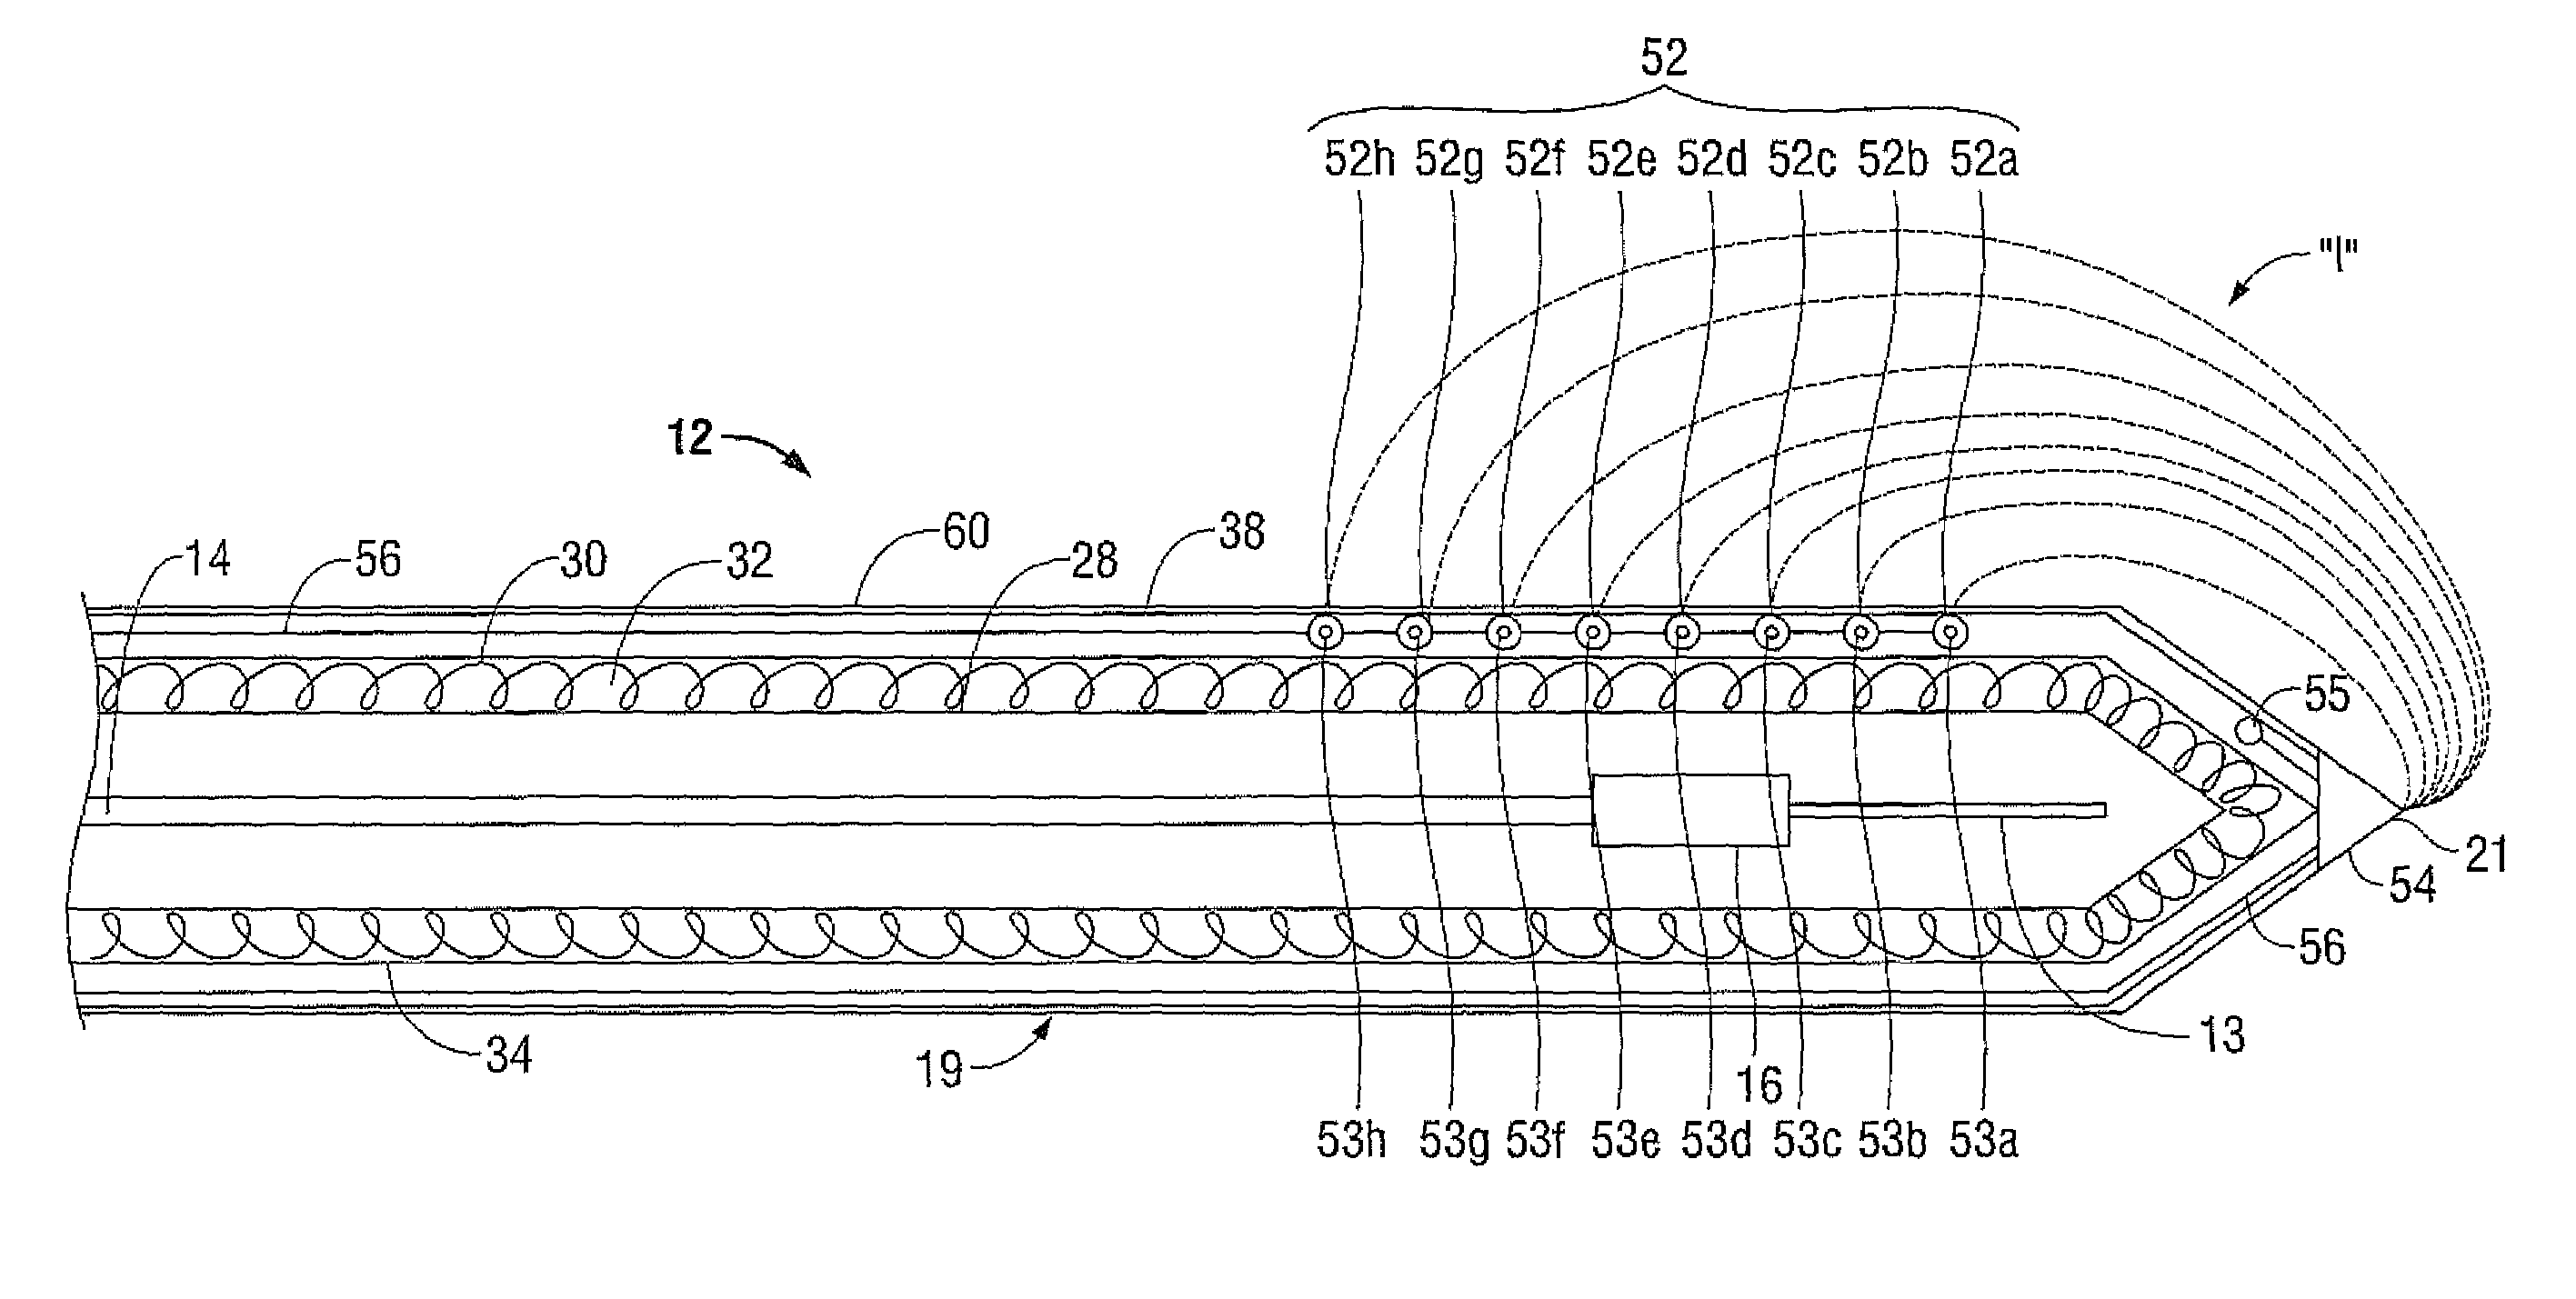 System for monitoring ablation size